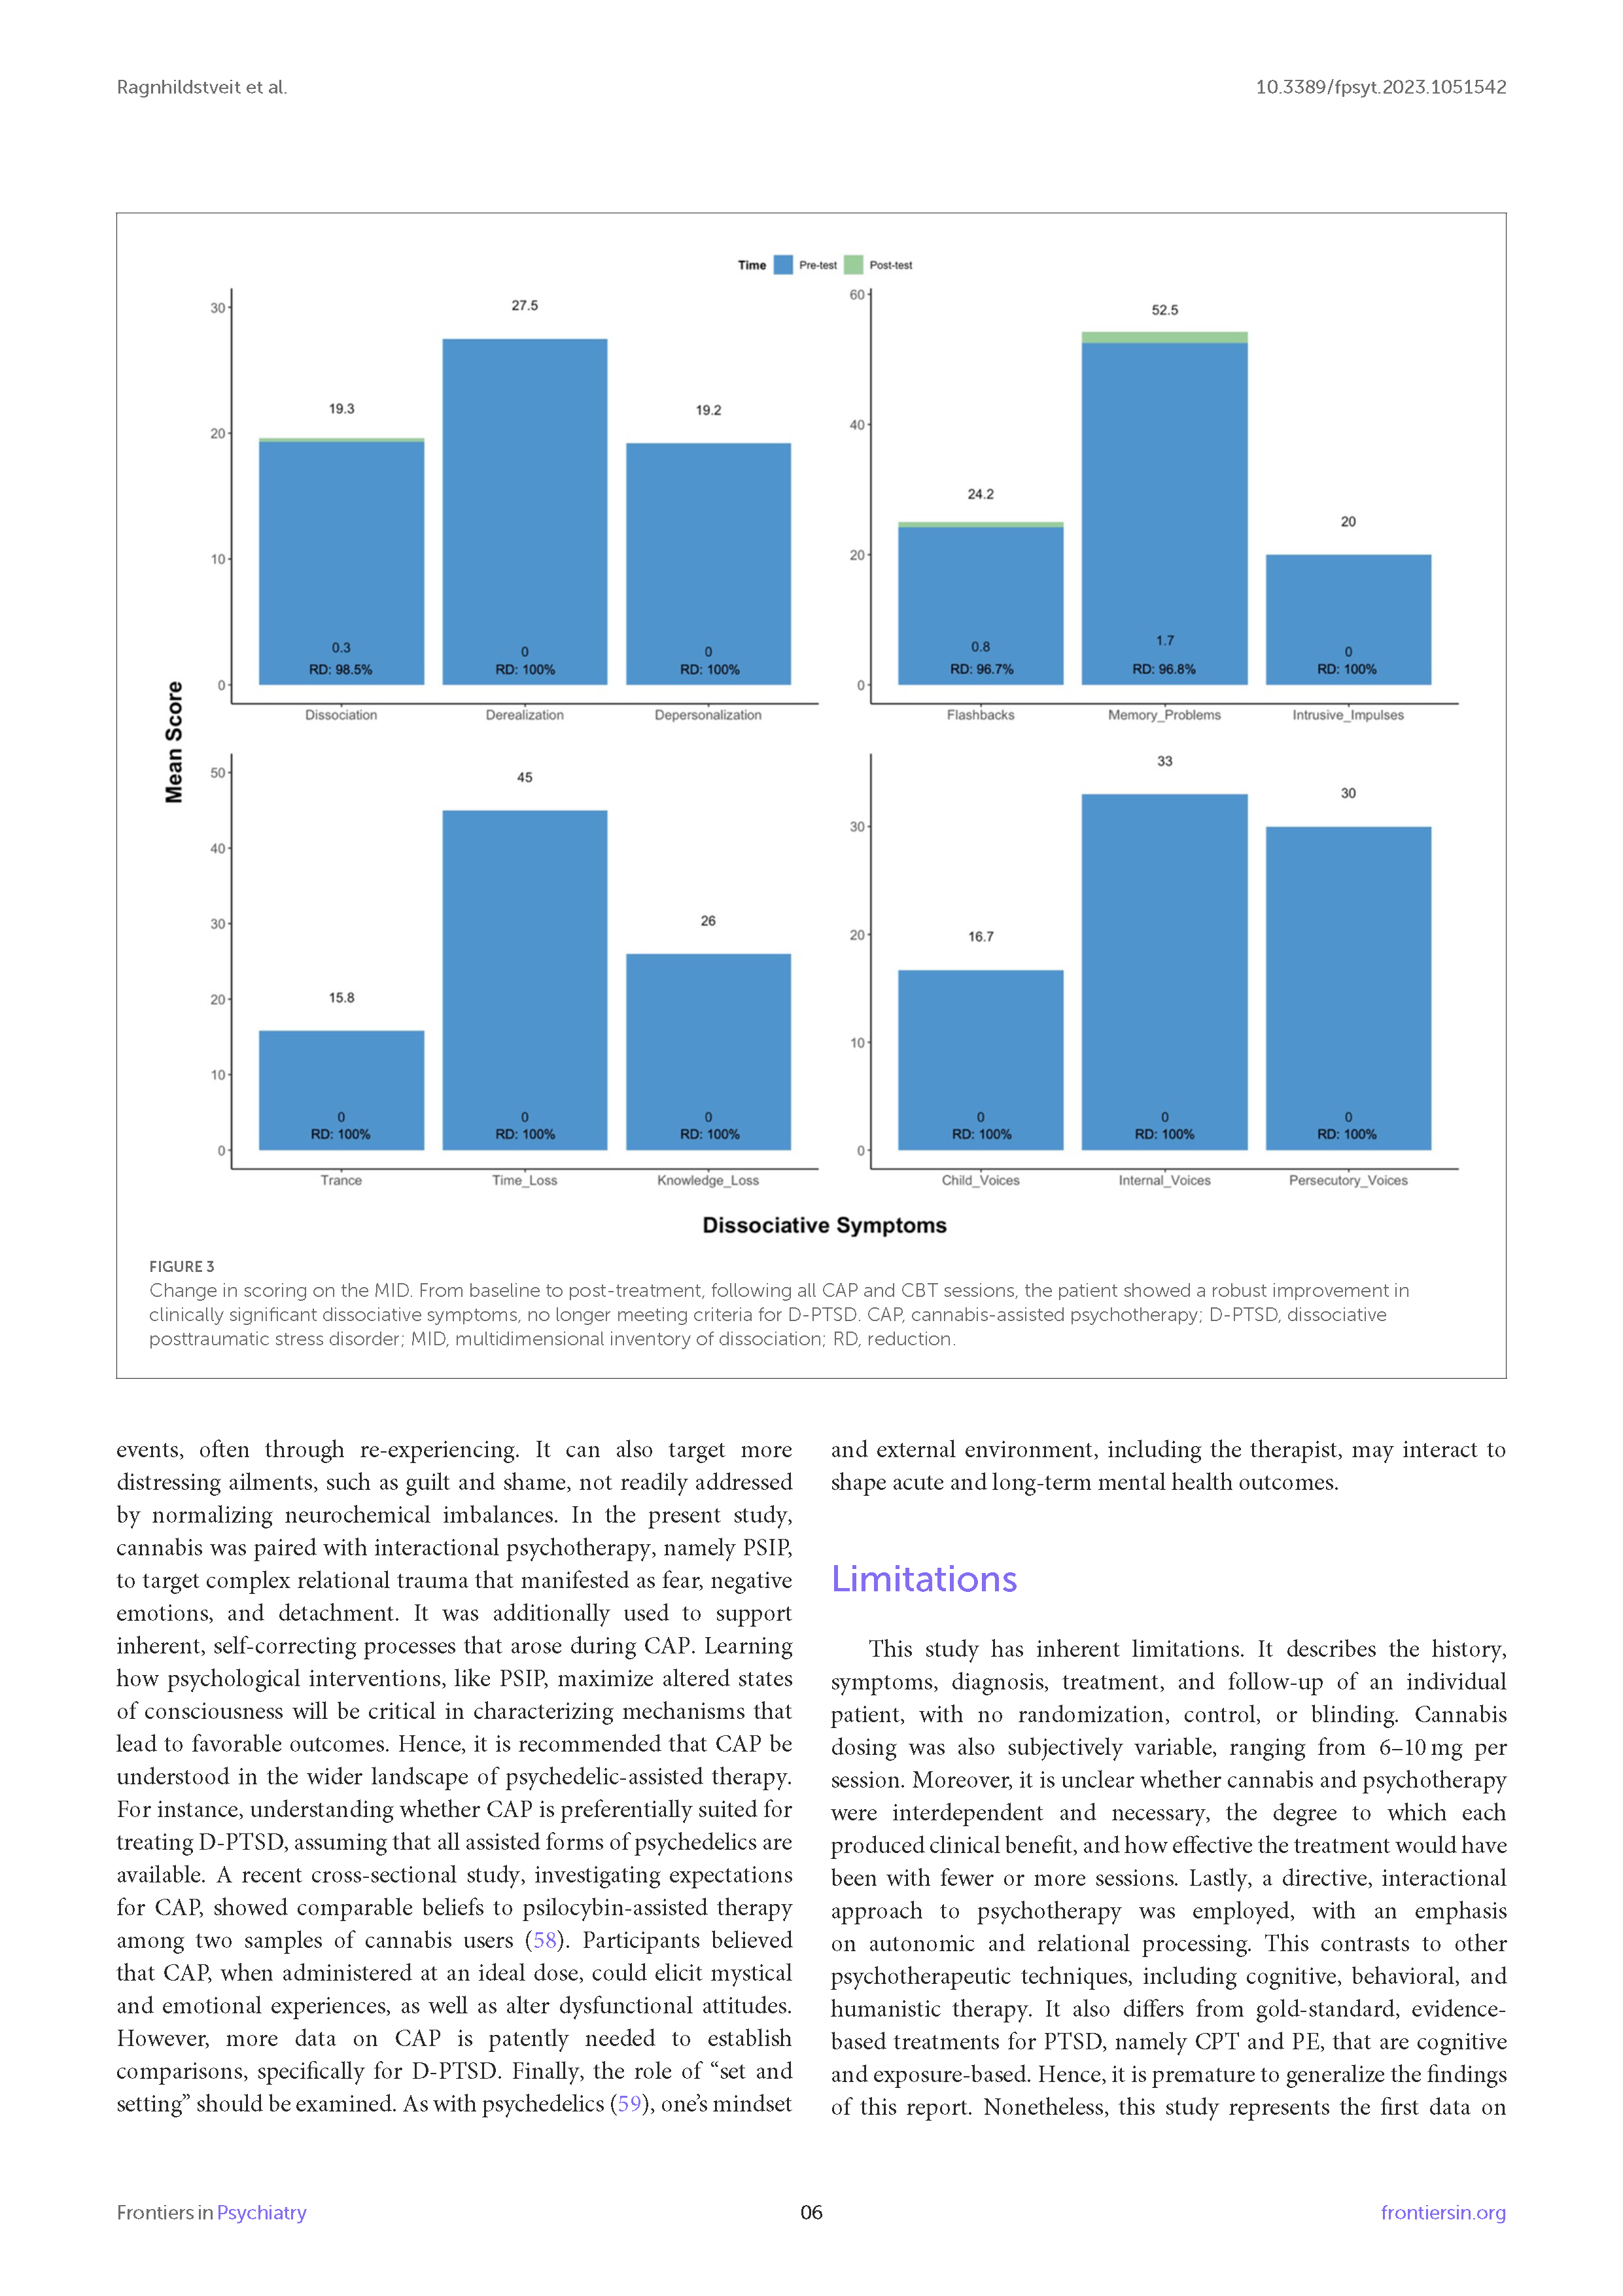 Cannabis-assisted psychotherapy for complex dissociative PTSD - A case report_Page_6.png